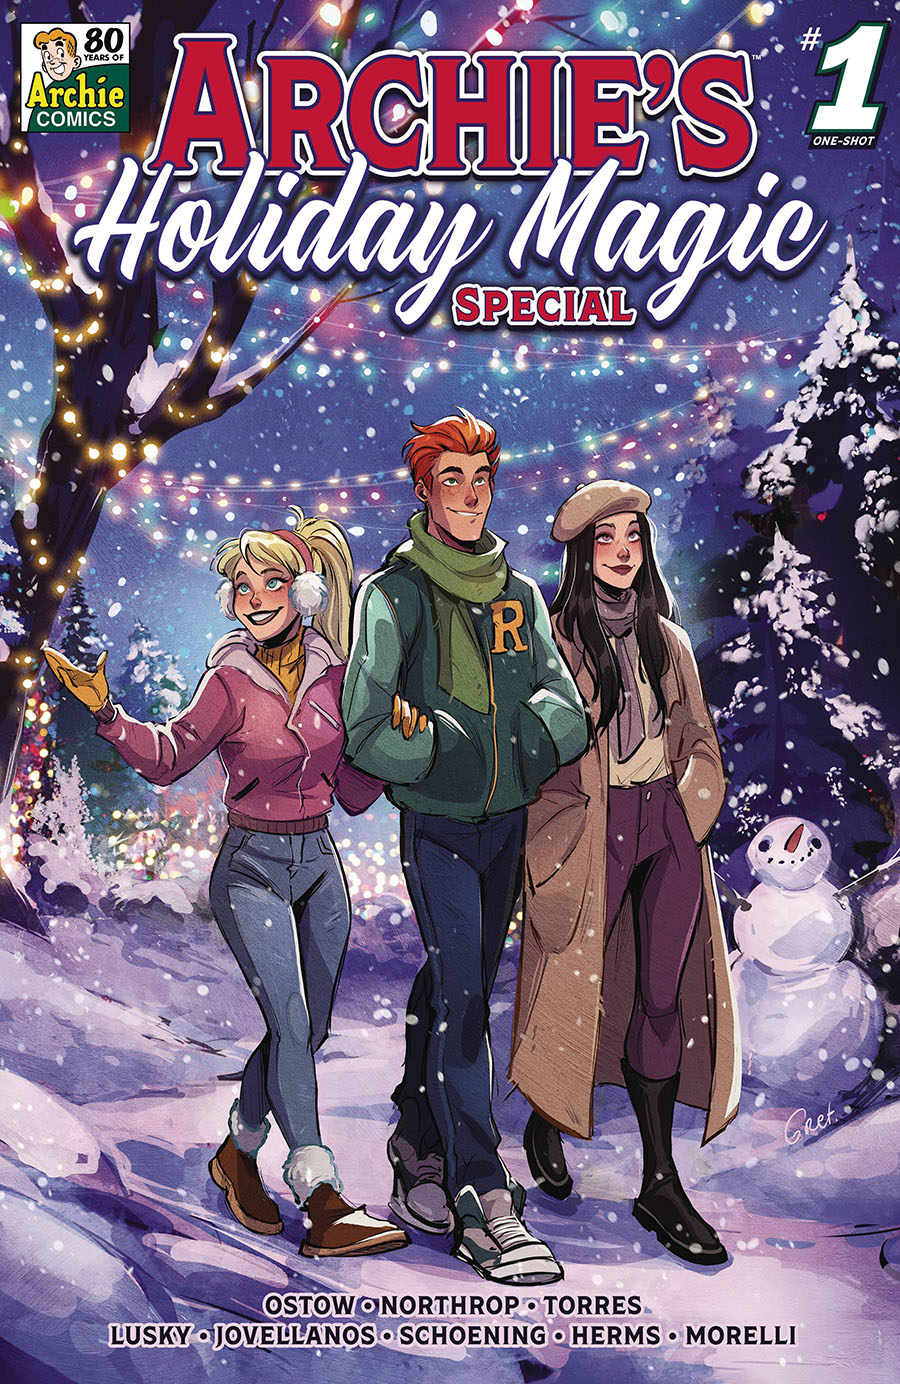 Archies Holiday Magic Special #1 (One Shot) Cover A Regular Gretel Lusky Cover